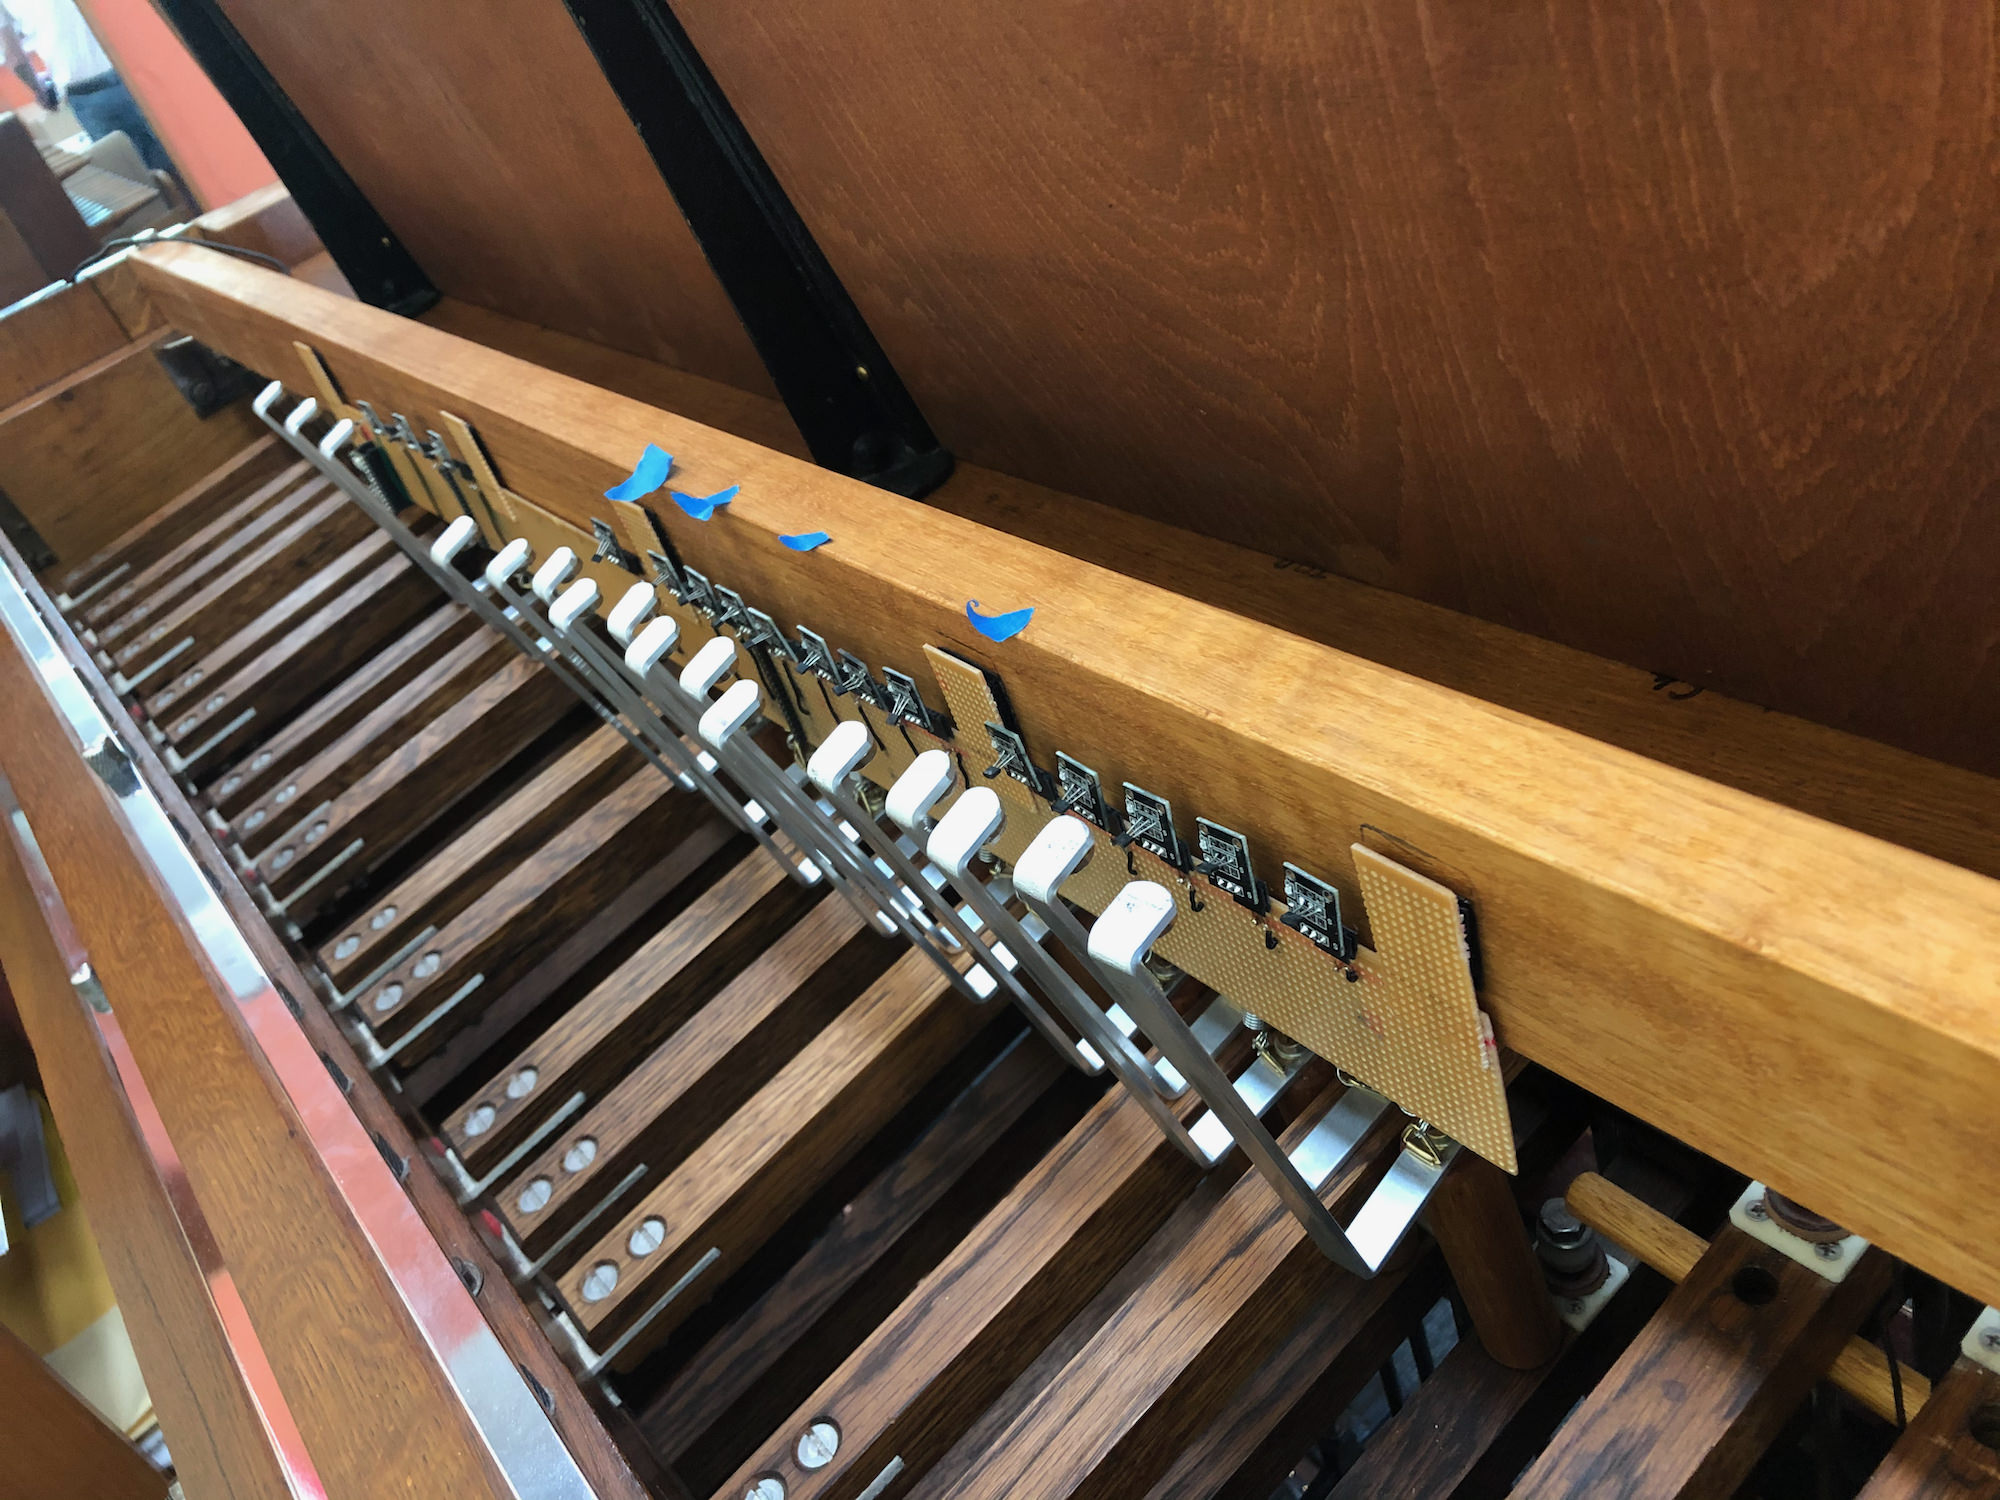 One octave of sensors installed on the carillon